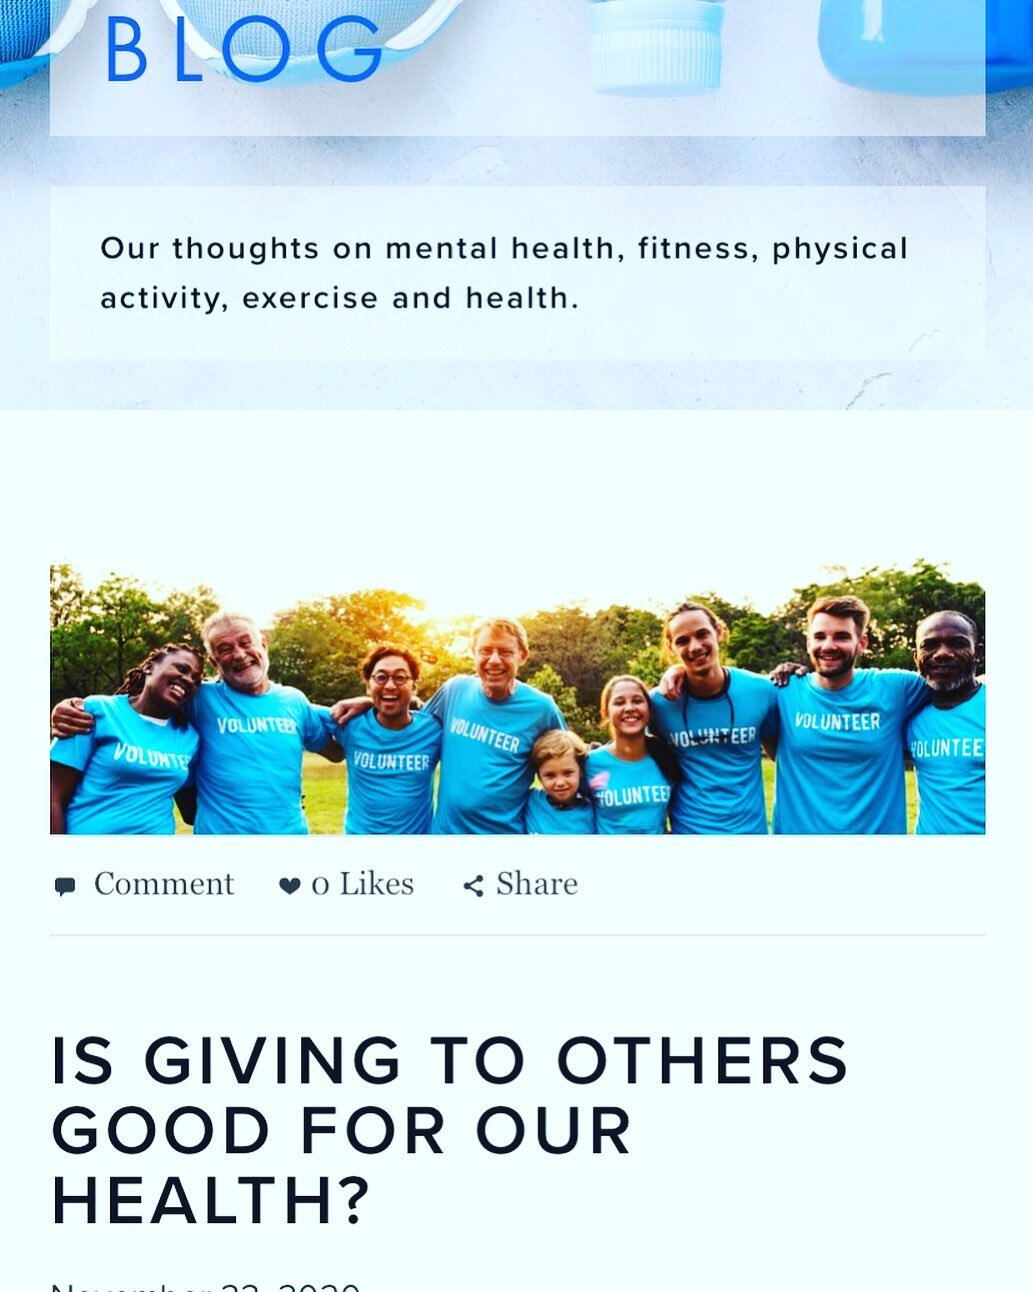 @fitpagey November blog is out - How giving to others is good for your health. 

What do you do to help others? Comment below!

#adlibtraining #mentalhealth #health 

https://www.ad-libtraining.com/ad-libblog/is-giving-to-others-good-for-our-health